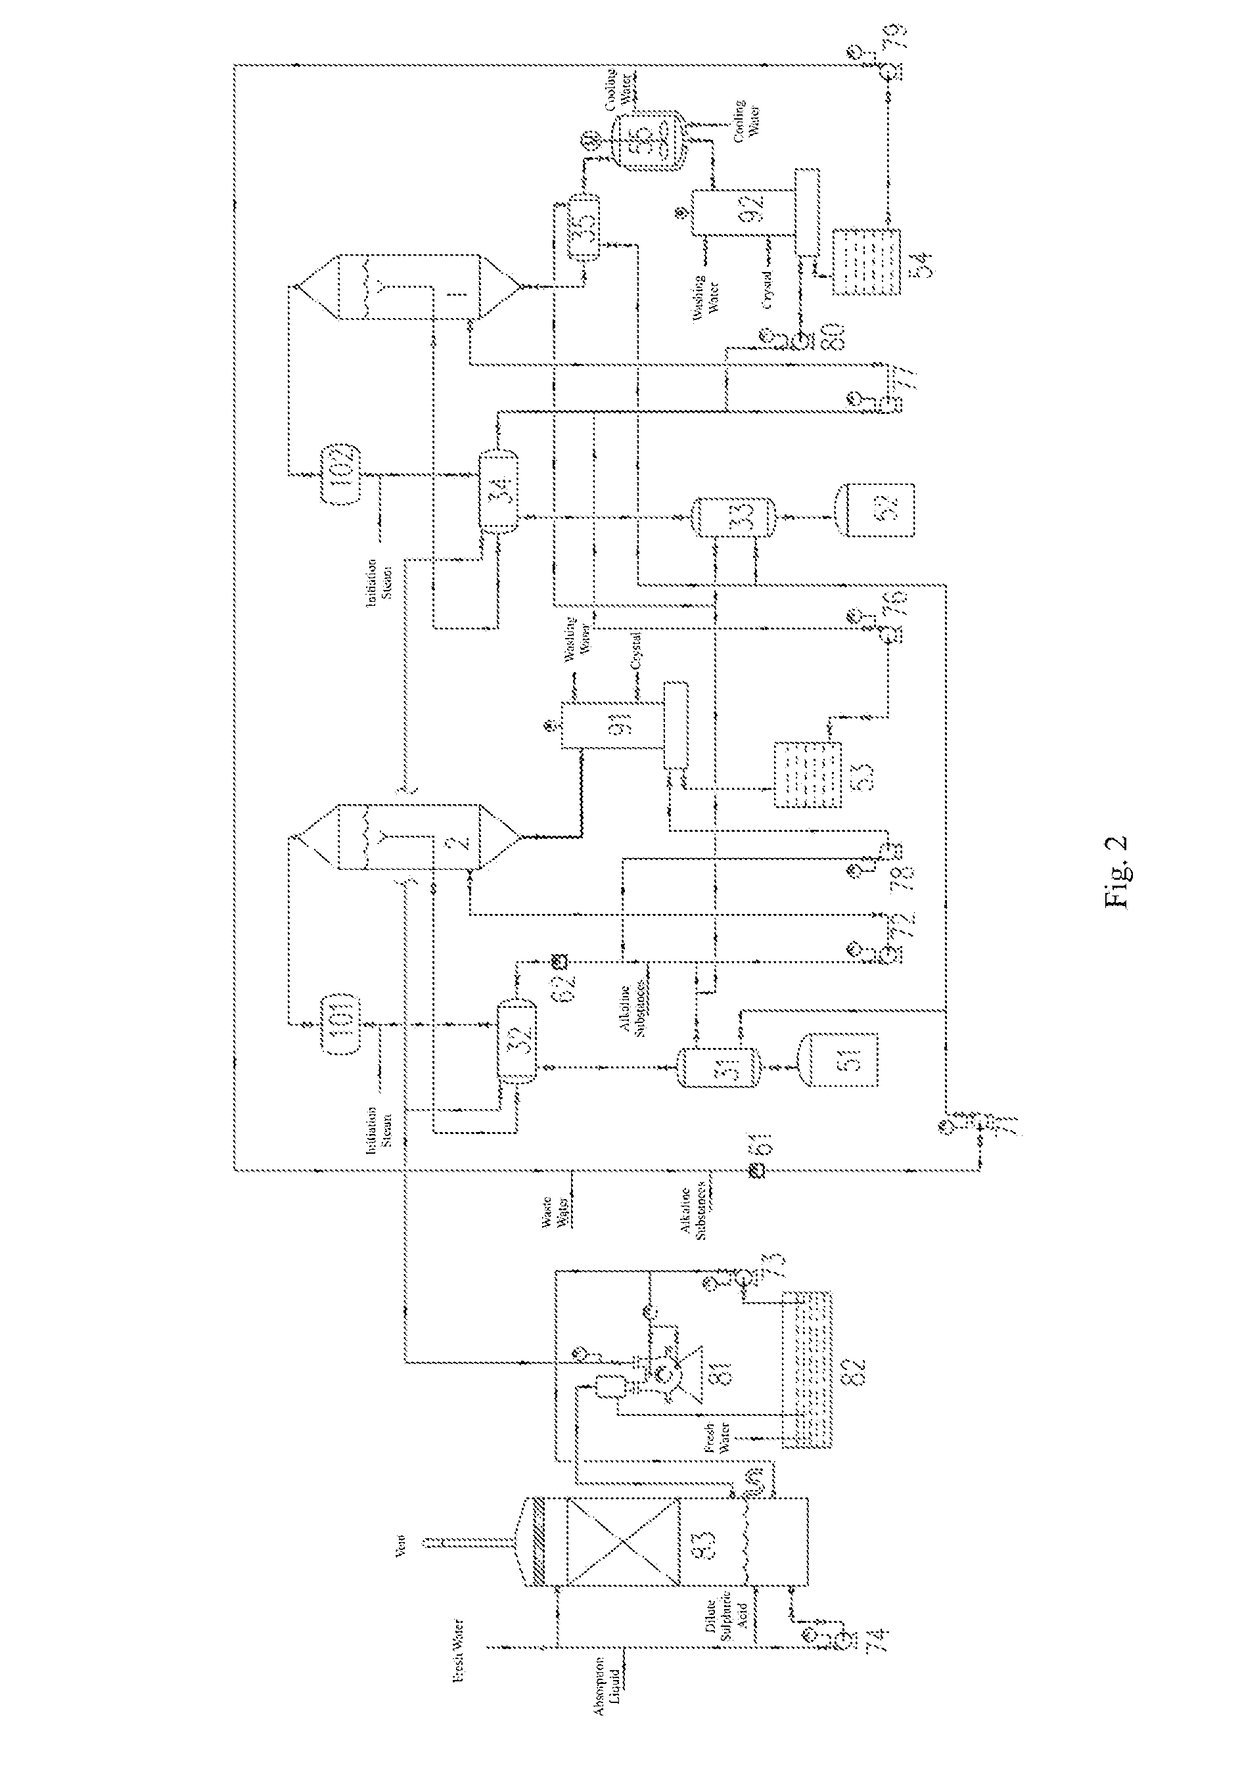 Apparatus and Method for Treating Waste Water Containing Ammonium Salts